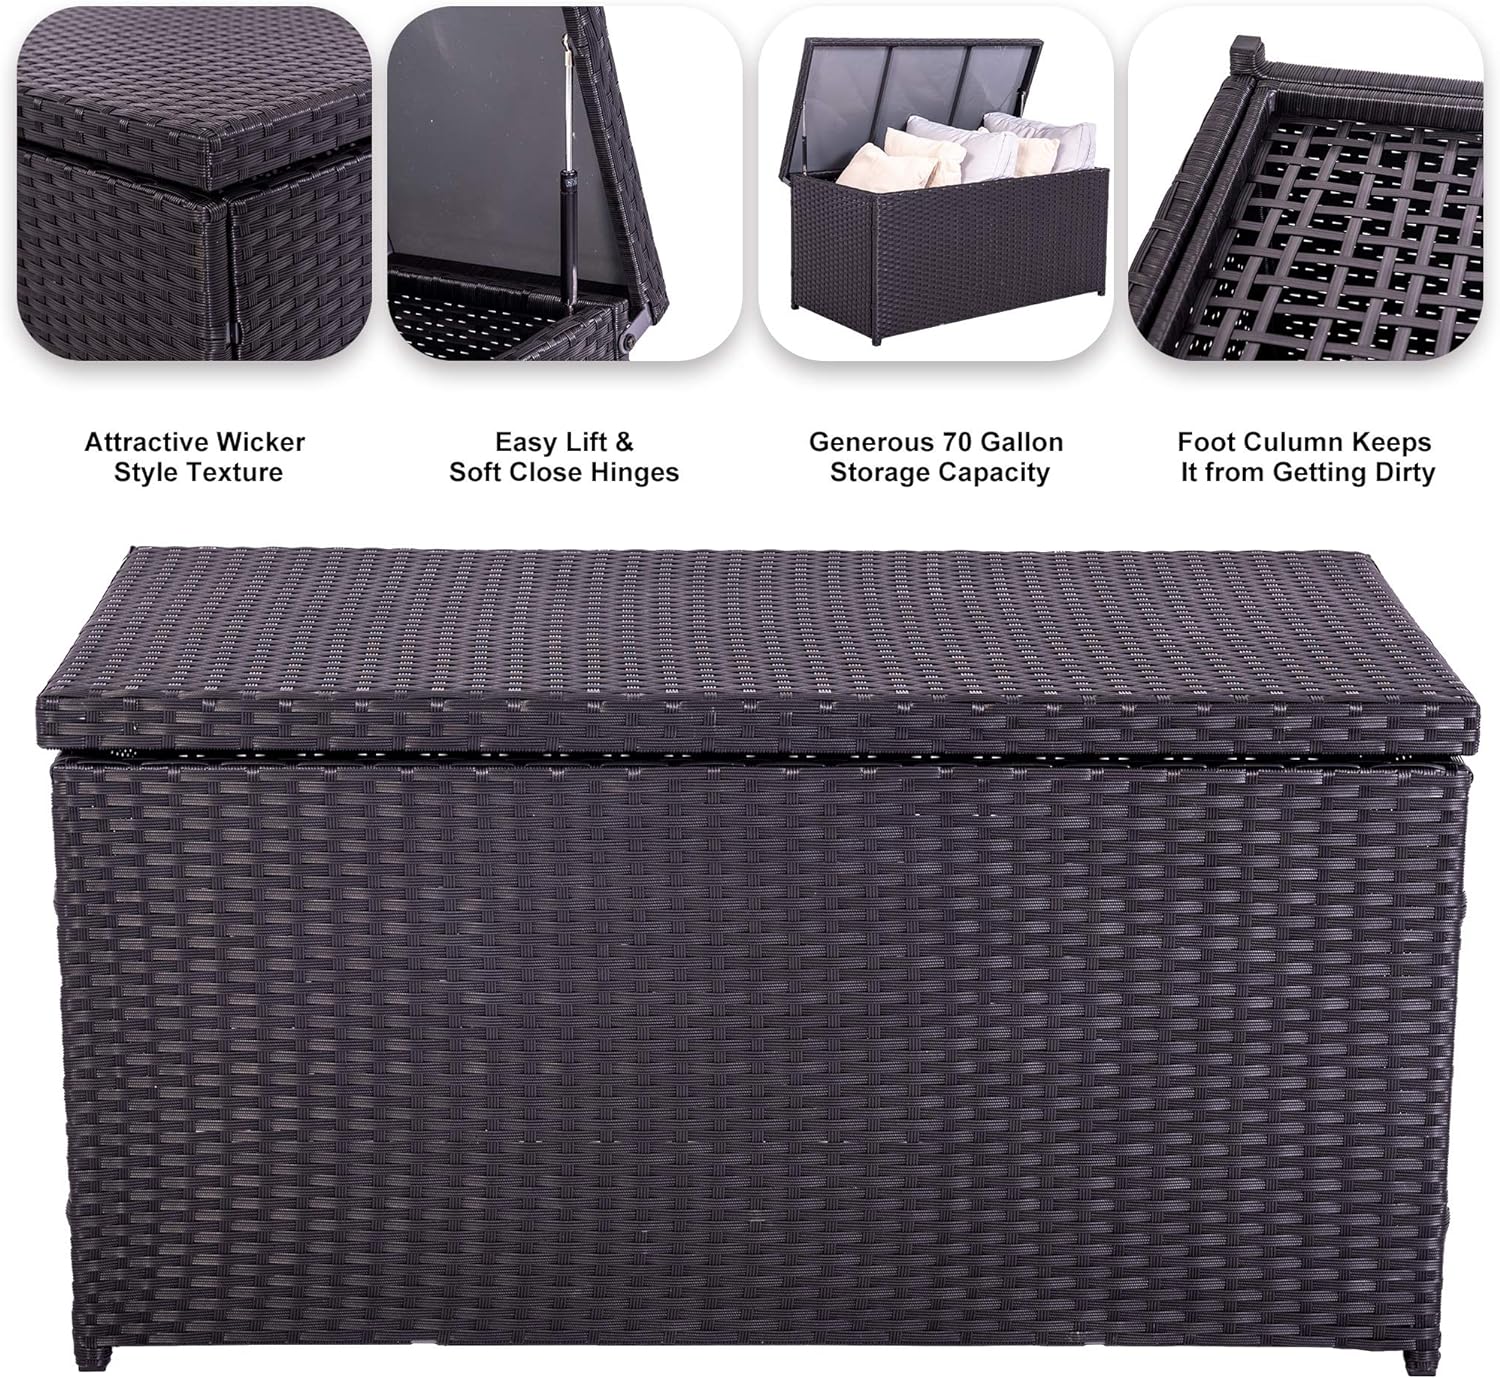 Sundale Outdoor Storage Box, 60 Gallon Wicker Patio Deck Boxes with Lid, Outdoor Cushion Storage Container Bin Chest for Kids Toys, Pillows, To